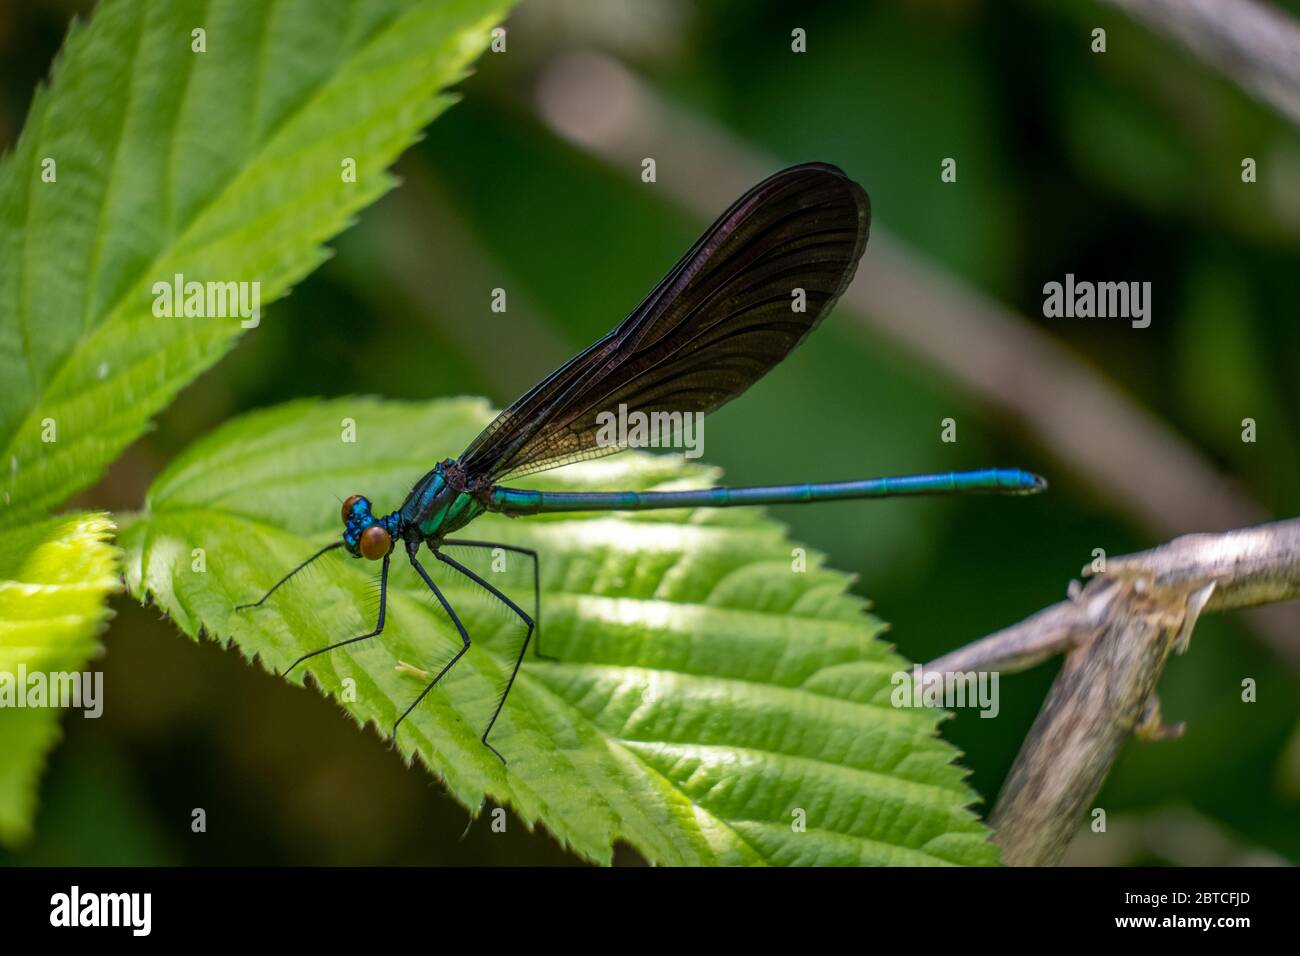 Ebony Jewelwing, Raleigh, North Carolina. The males have a metallic green or teal body, and they also have red eyes when freshly emerged. Stock Photo